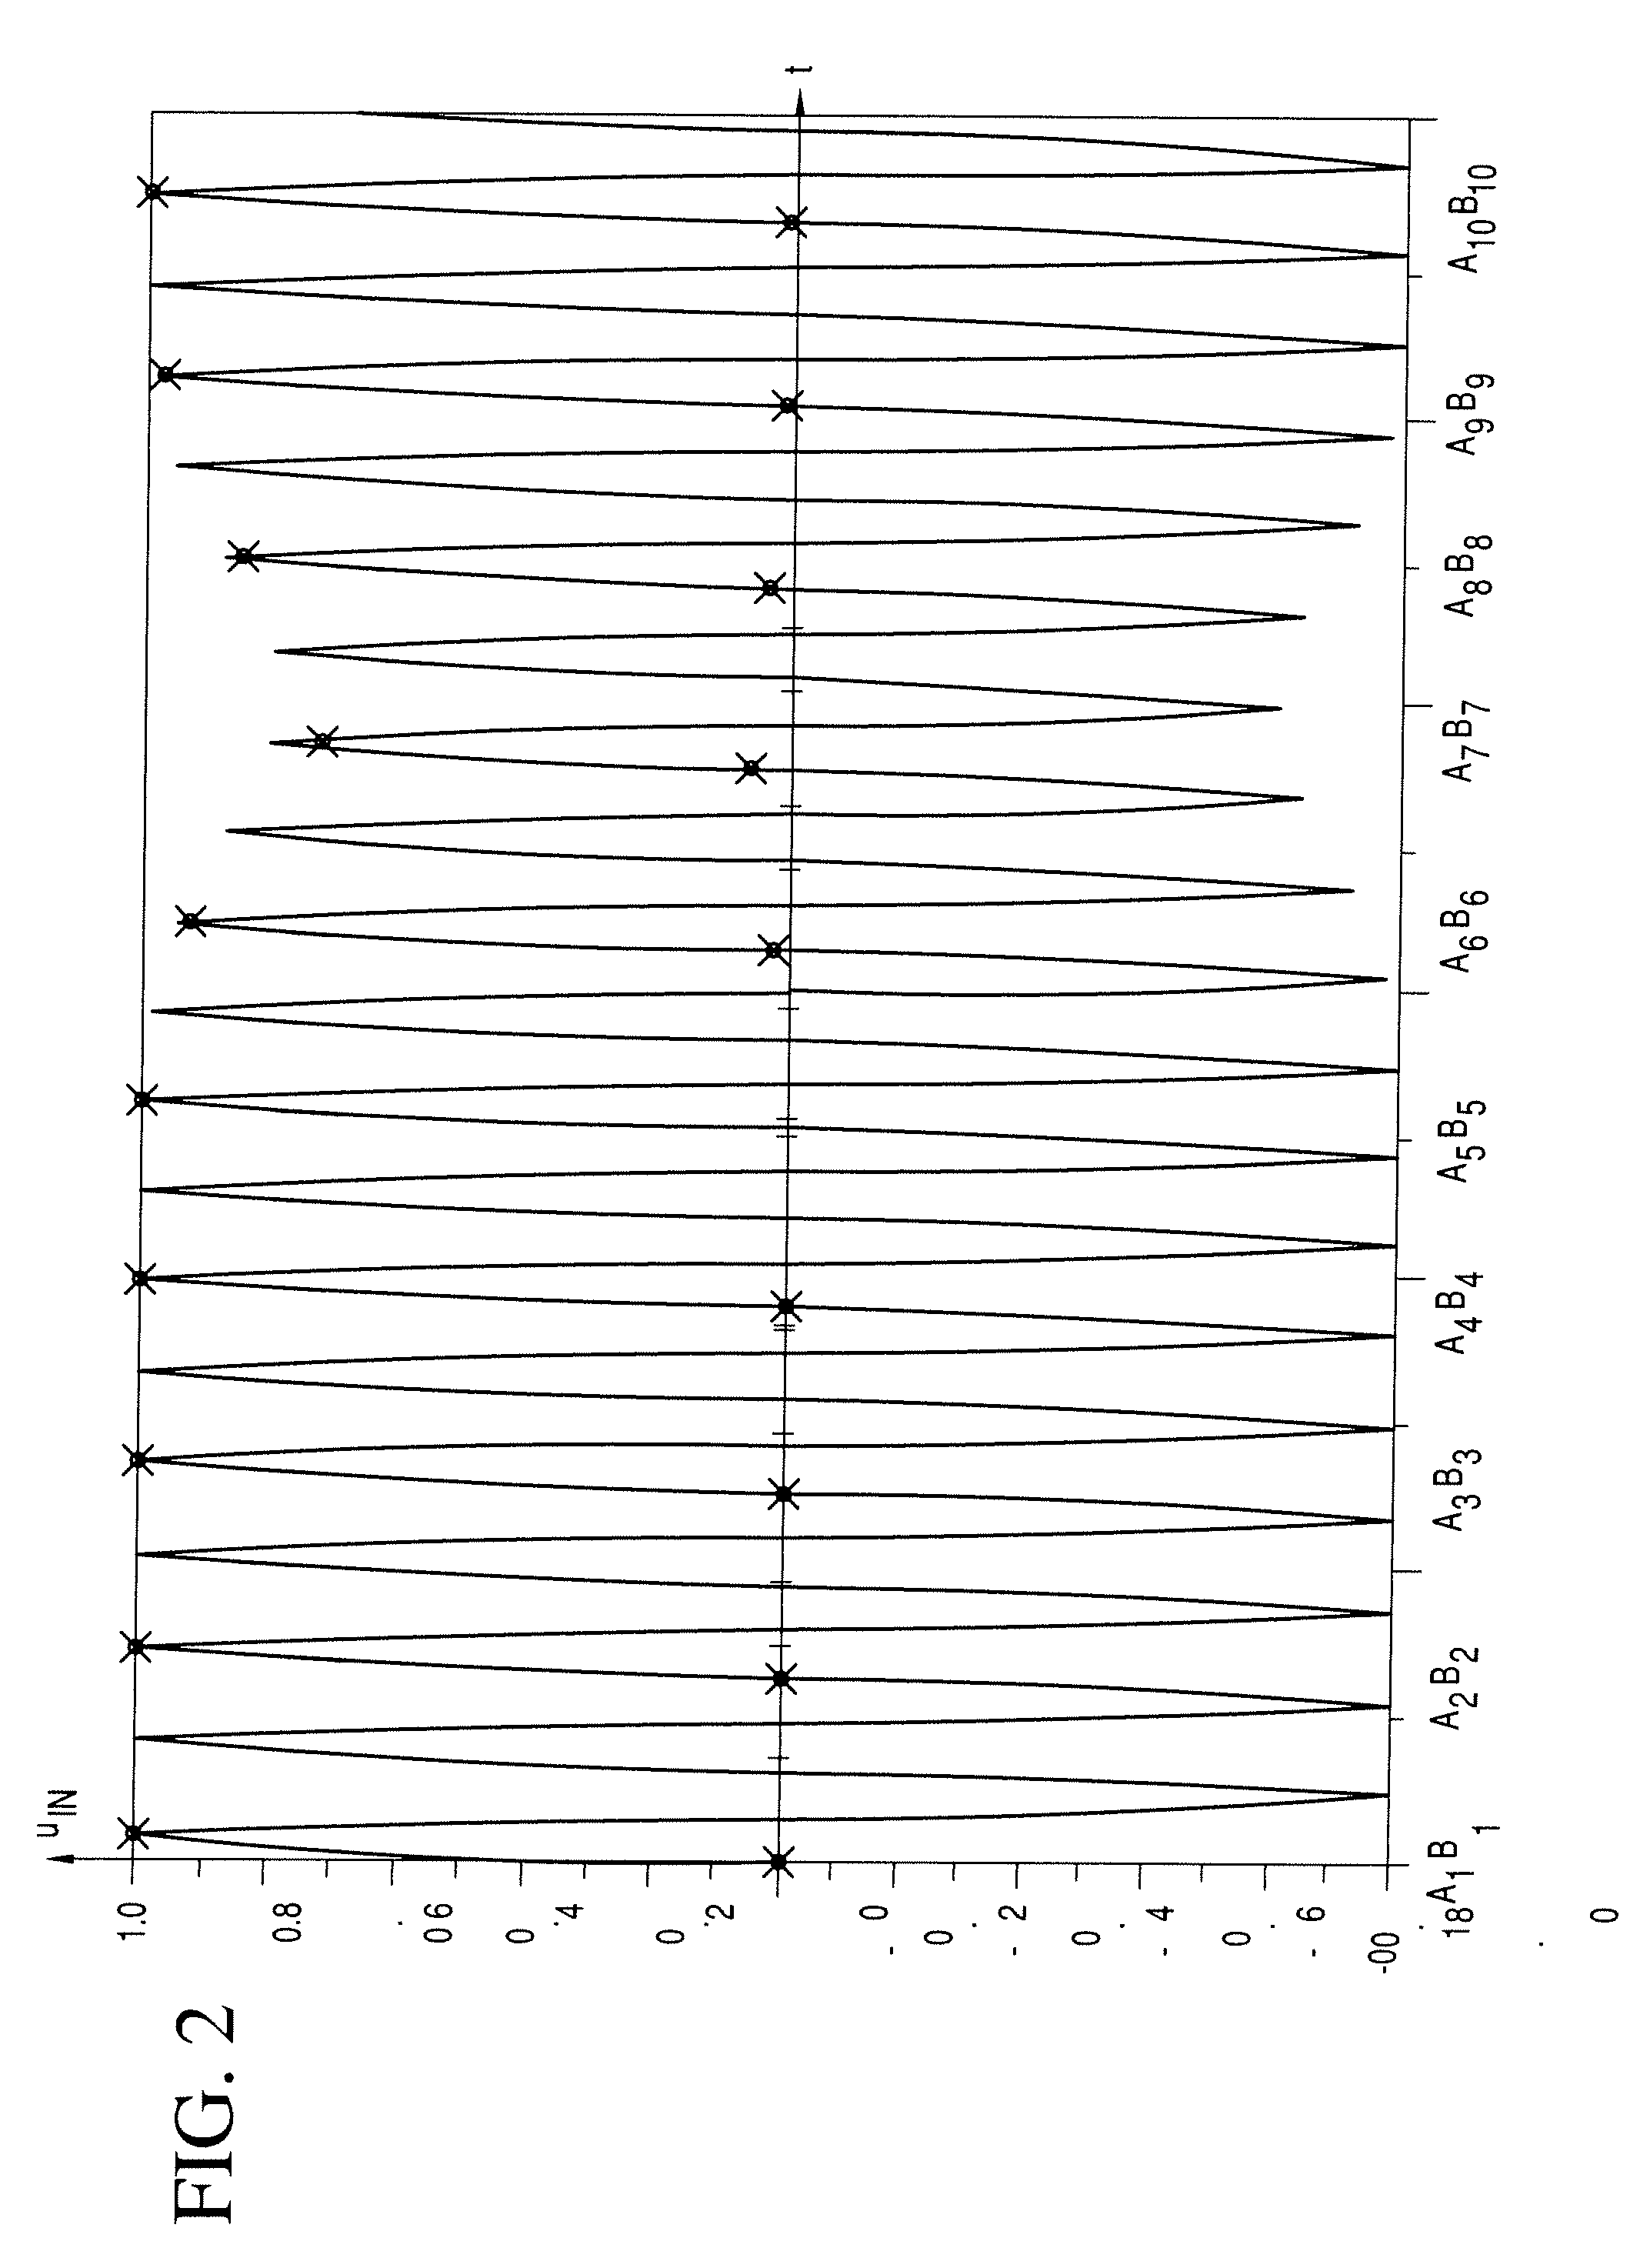 Device and process for detecting particles in a flowing liquid